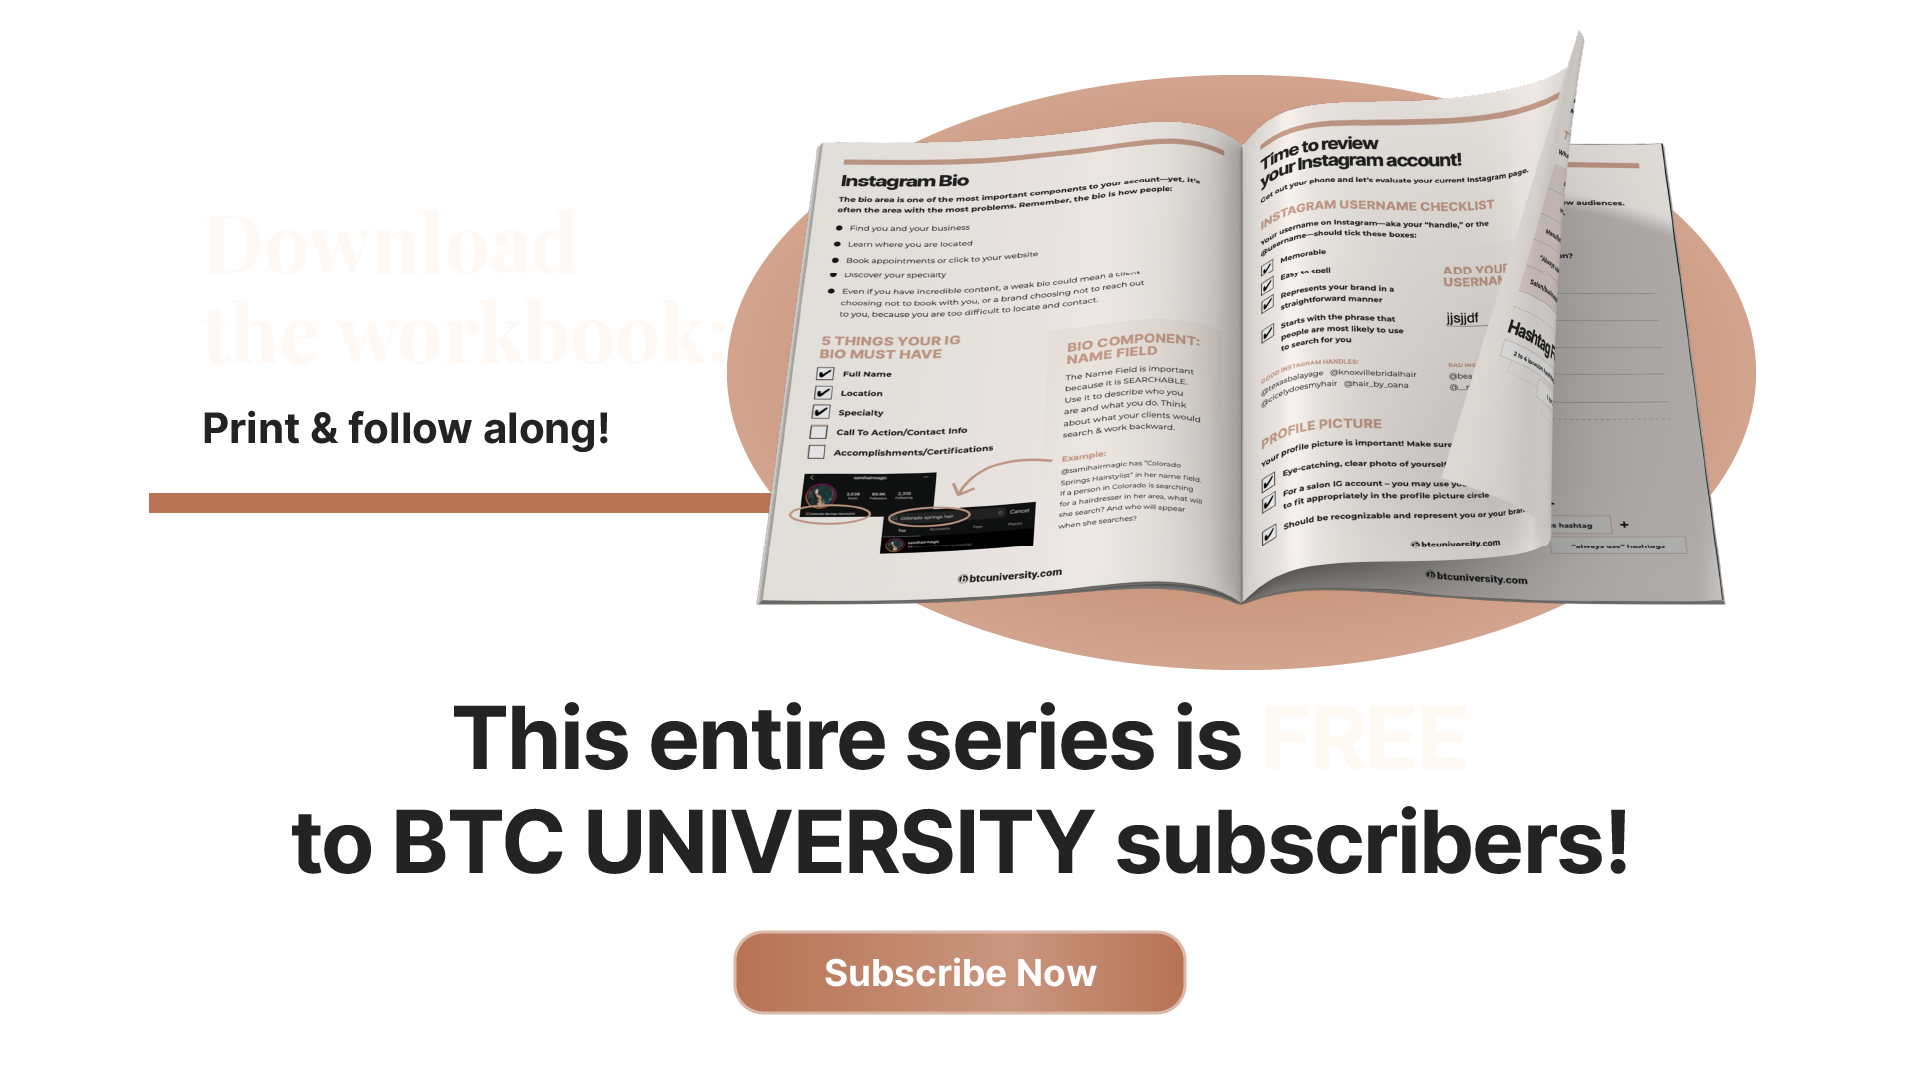 download the workbook for free